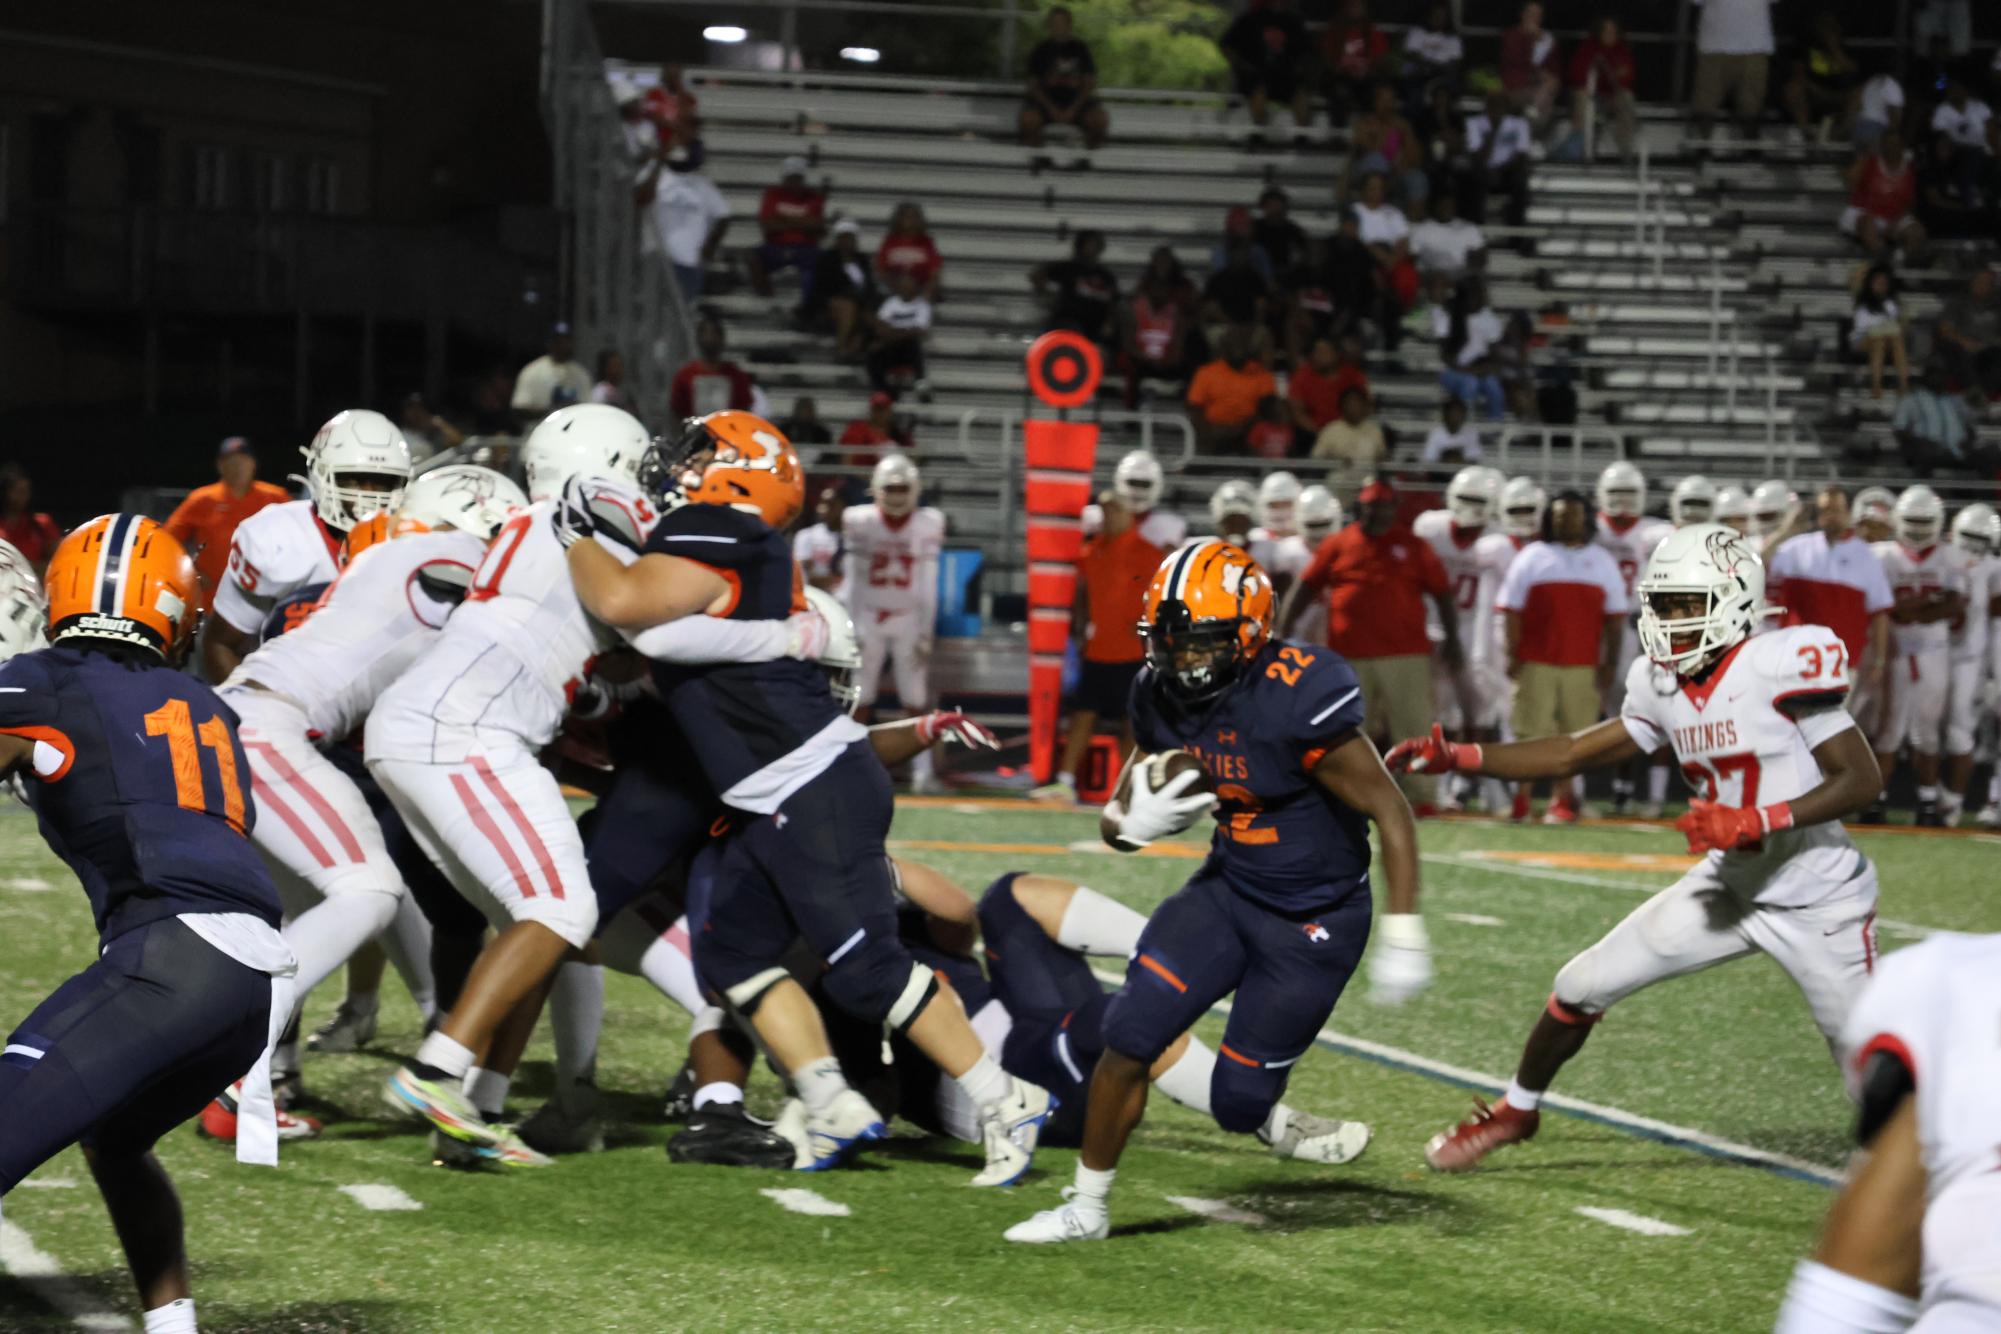 Naperville North High School’s Varsity Football Team Wins Opening Game, Prepares for Showdown Against #2 Loyola Academy